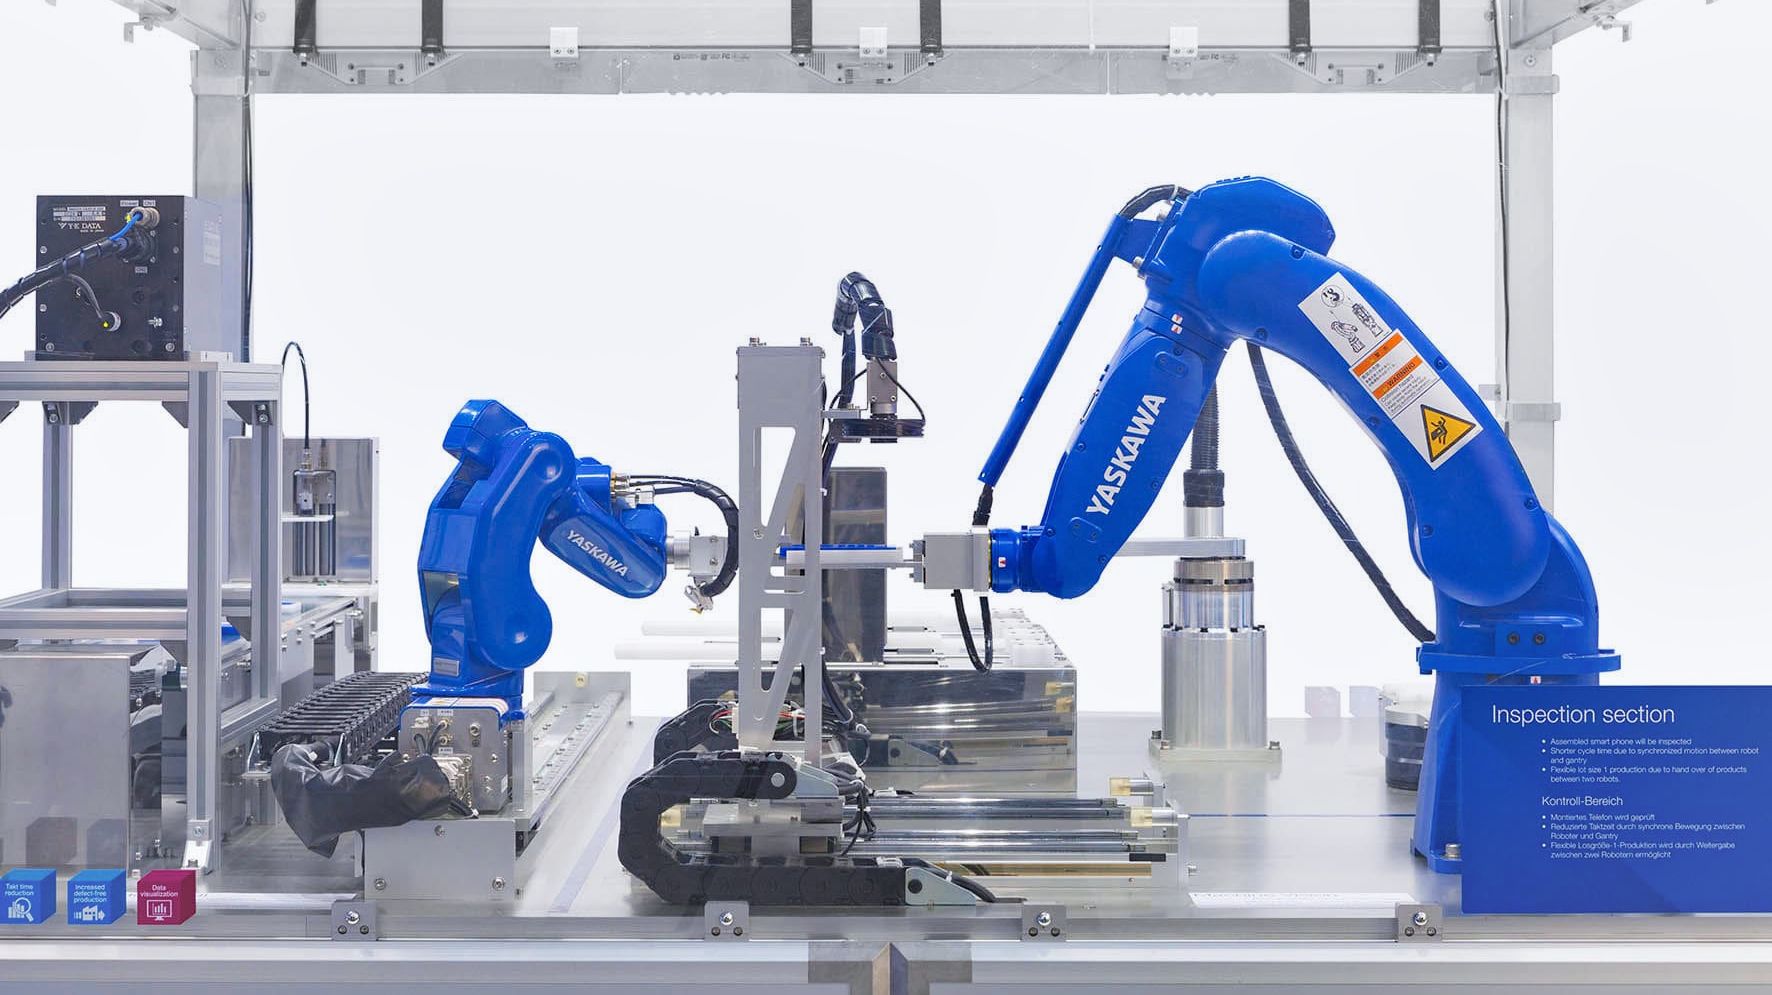 Industrial Robot Companies That the Industry RoboDK blog